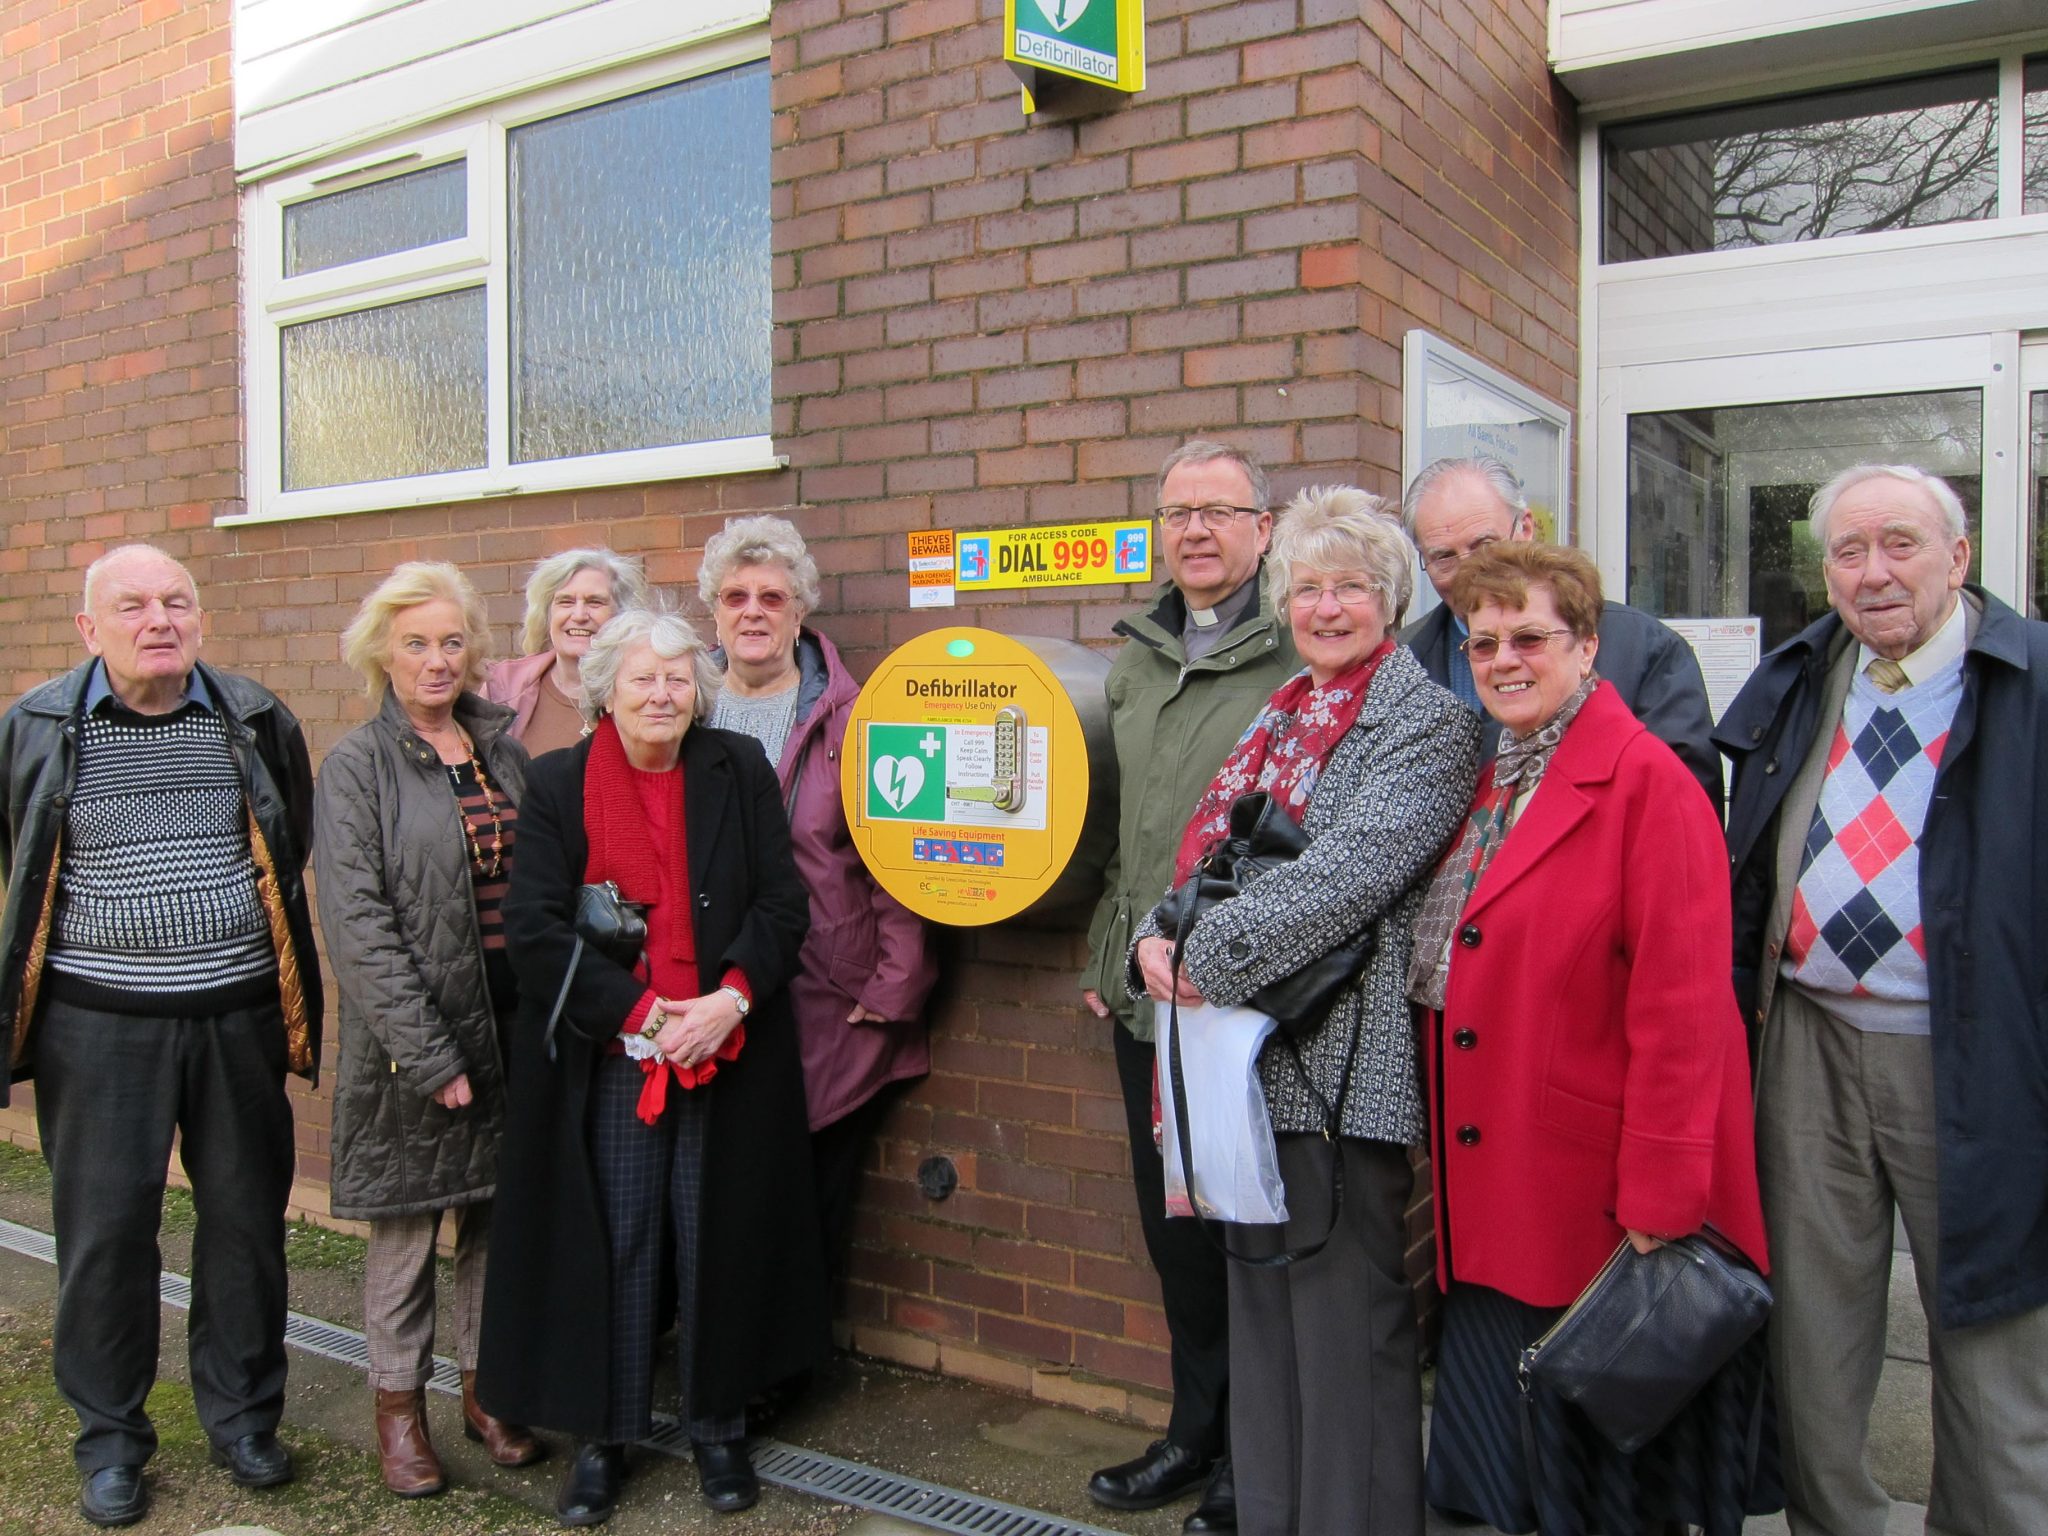 IMG_3480 (003) Defib photo for Sutton Council